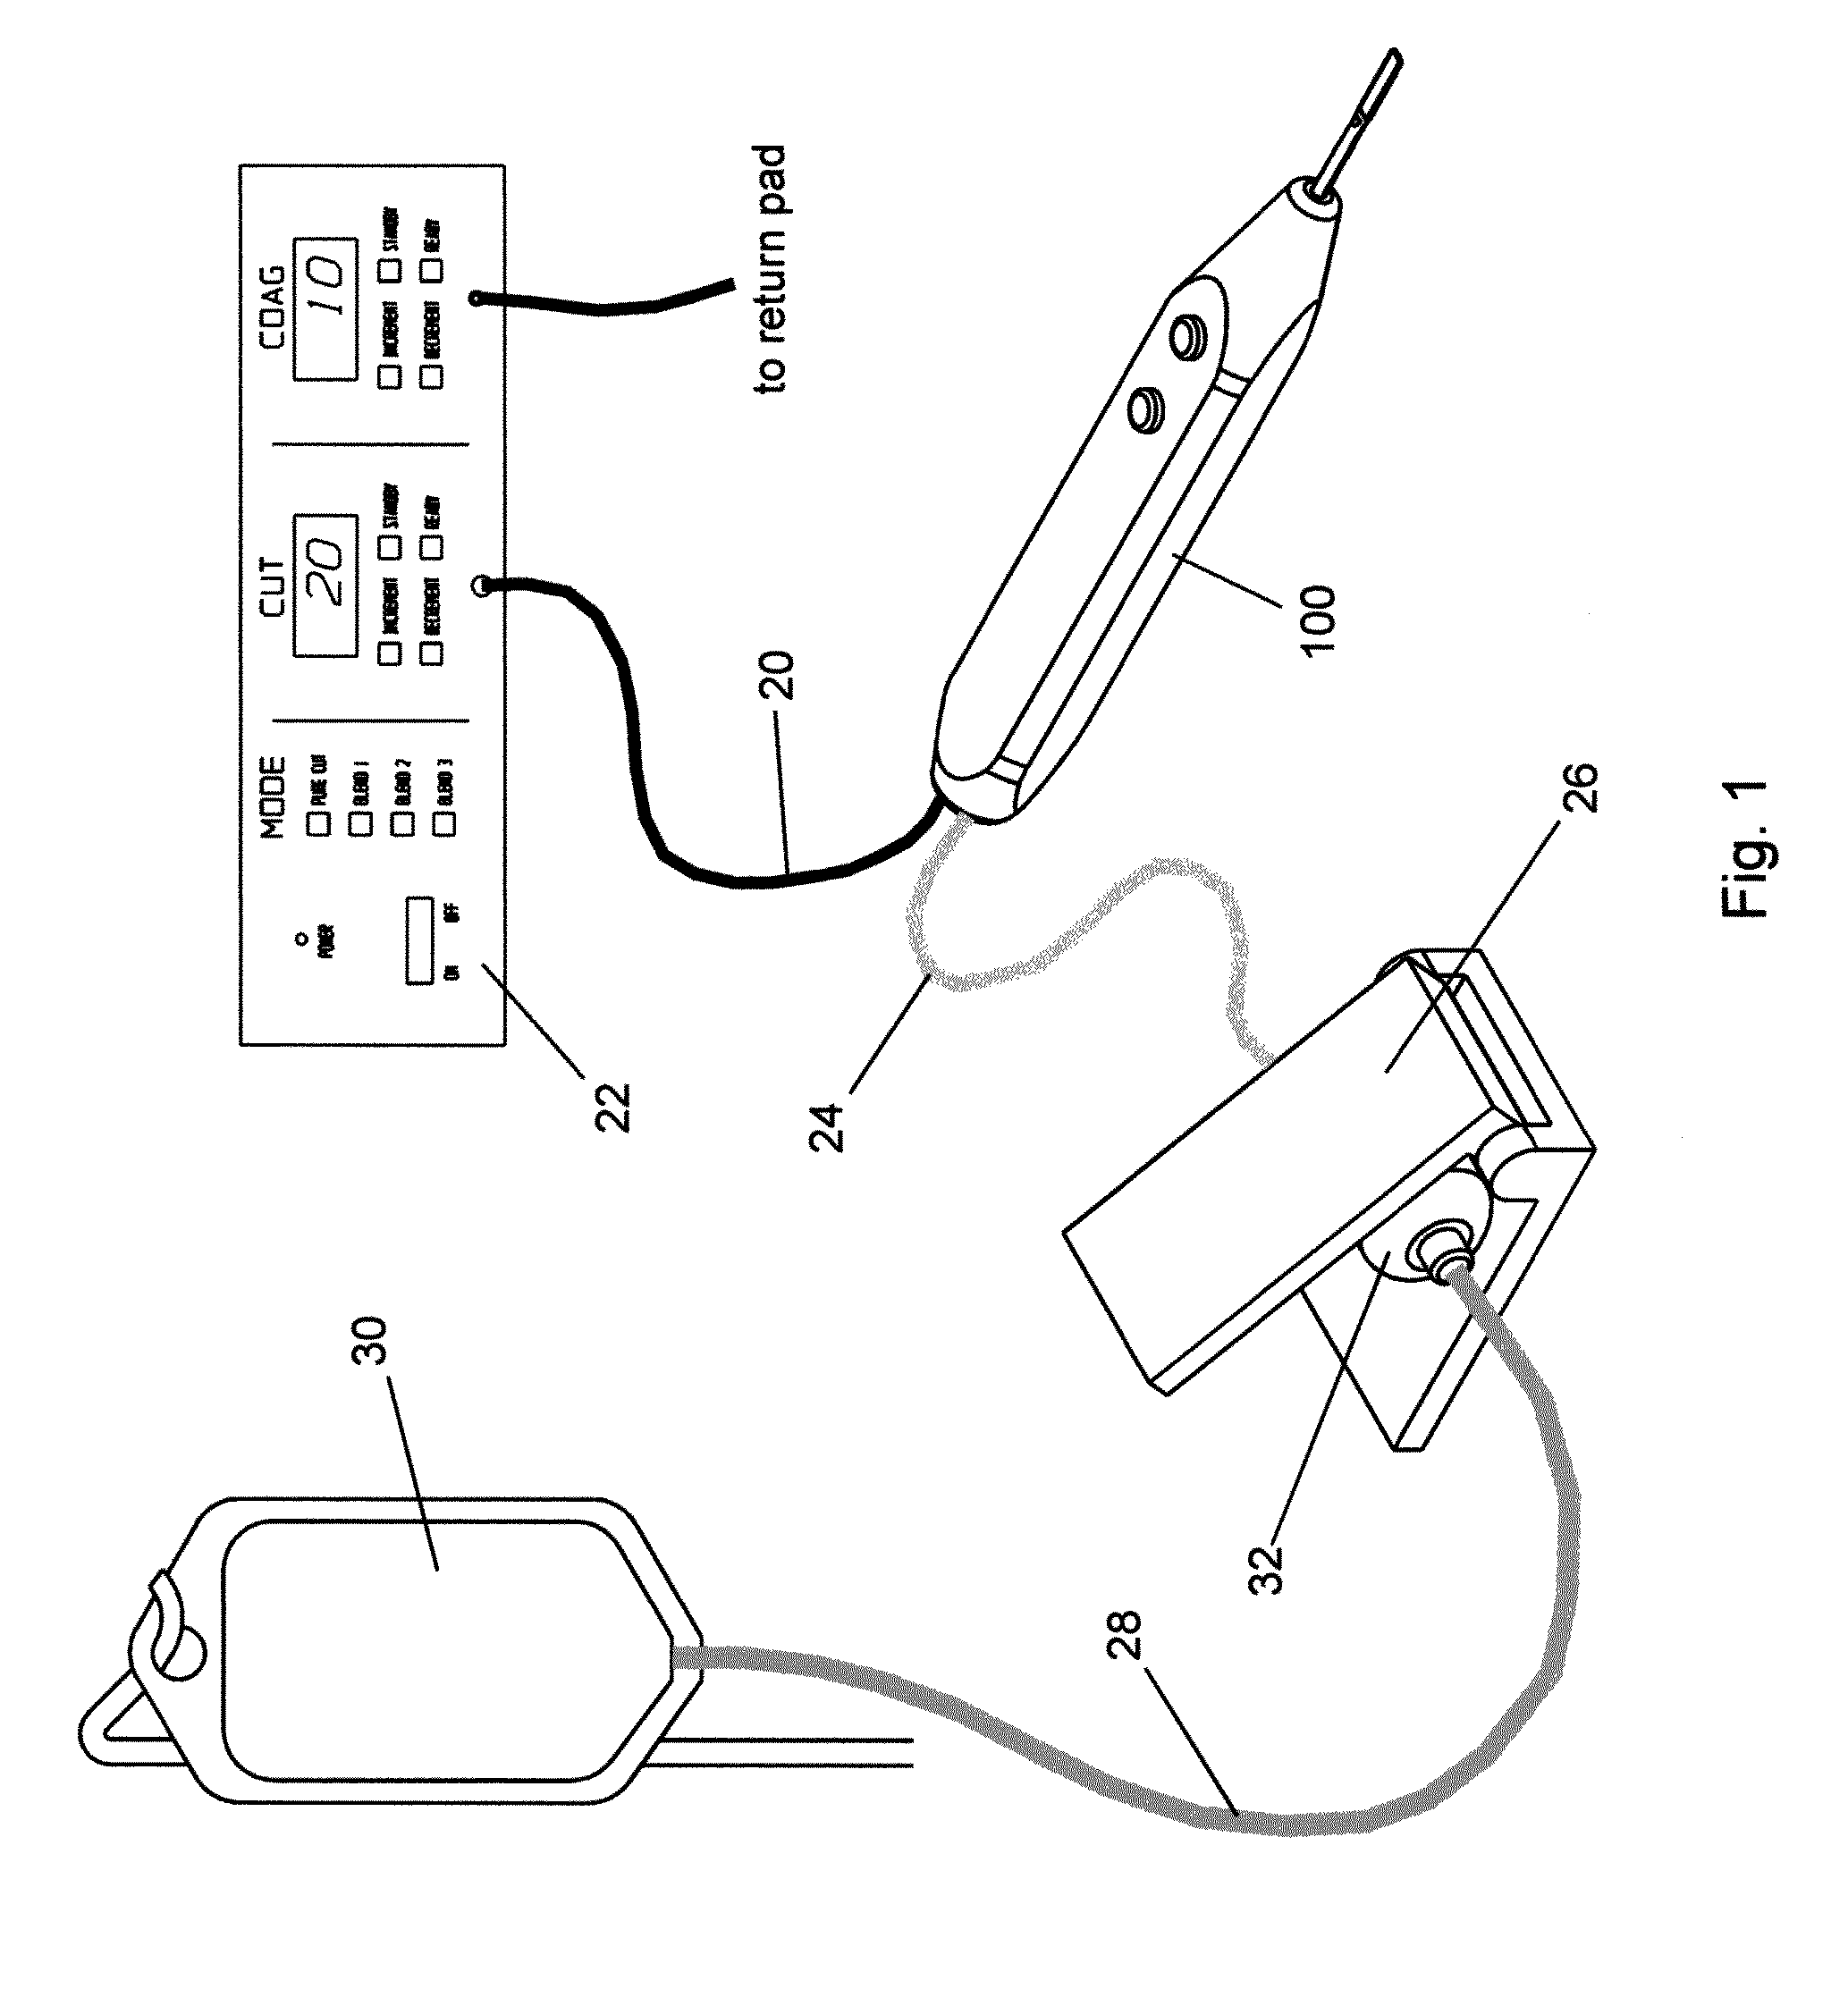 Dual-mode electrosurgical devices and electrosurgical methods using same